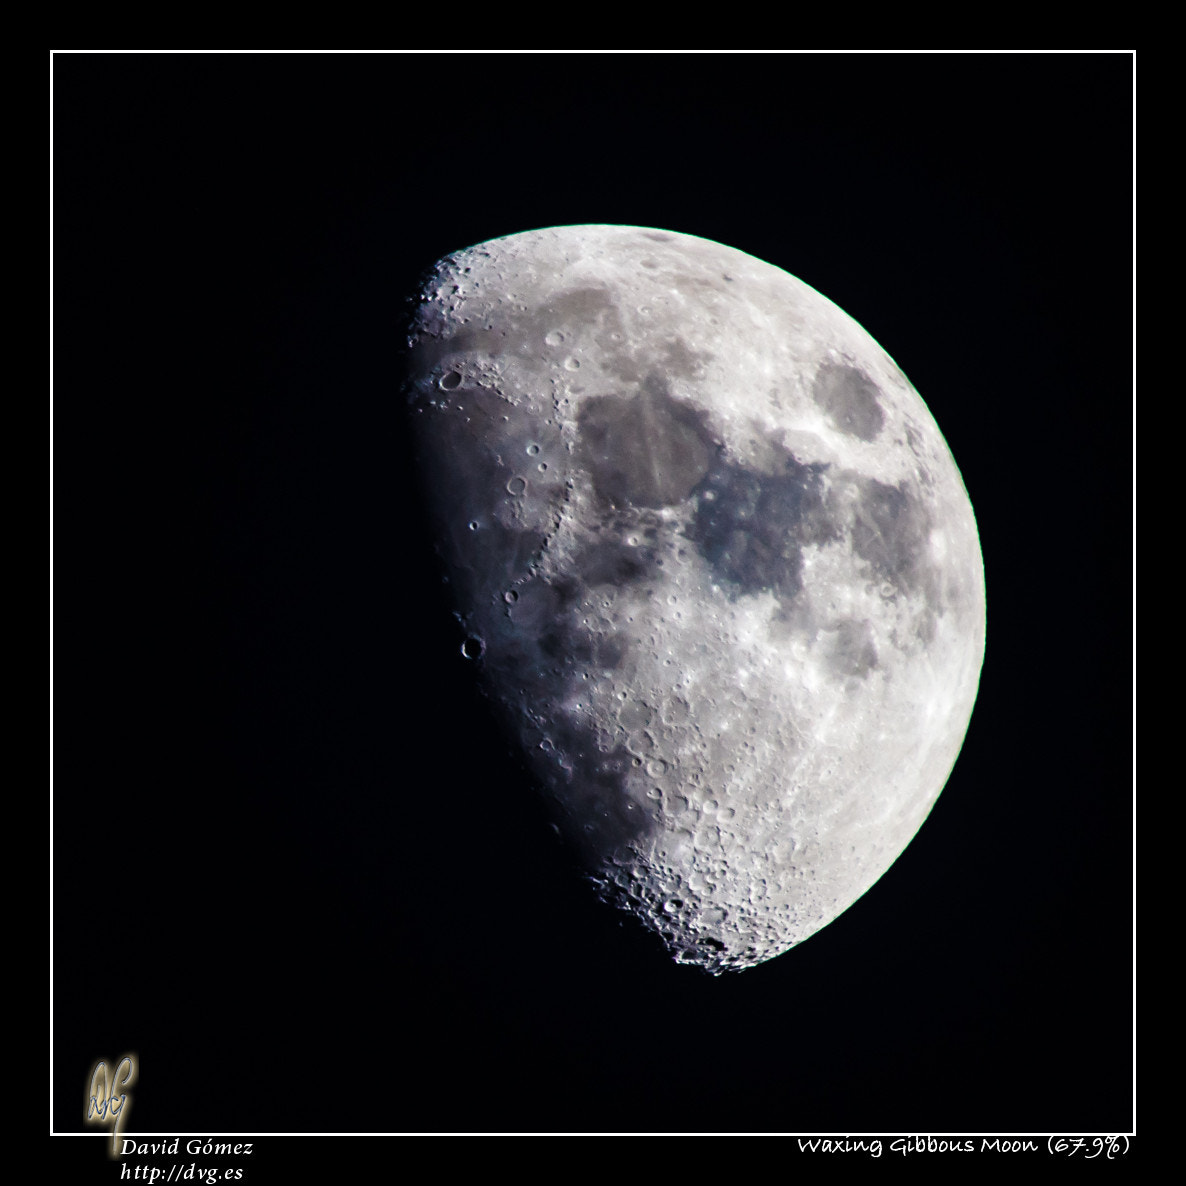 Sigma 50-500mm f/4-6.3 APO HSM EX sample photo. Waxing gibbous moon (67.9%) photography